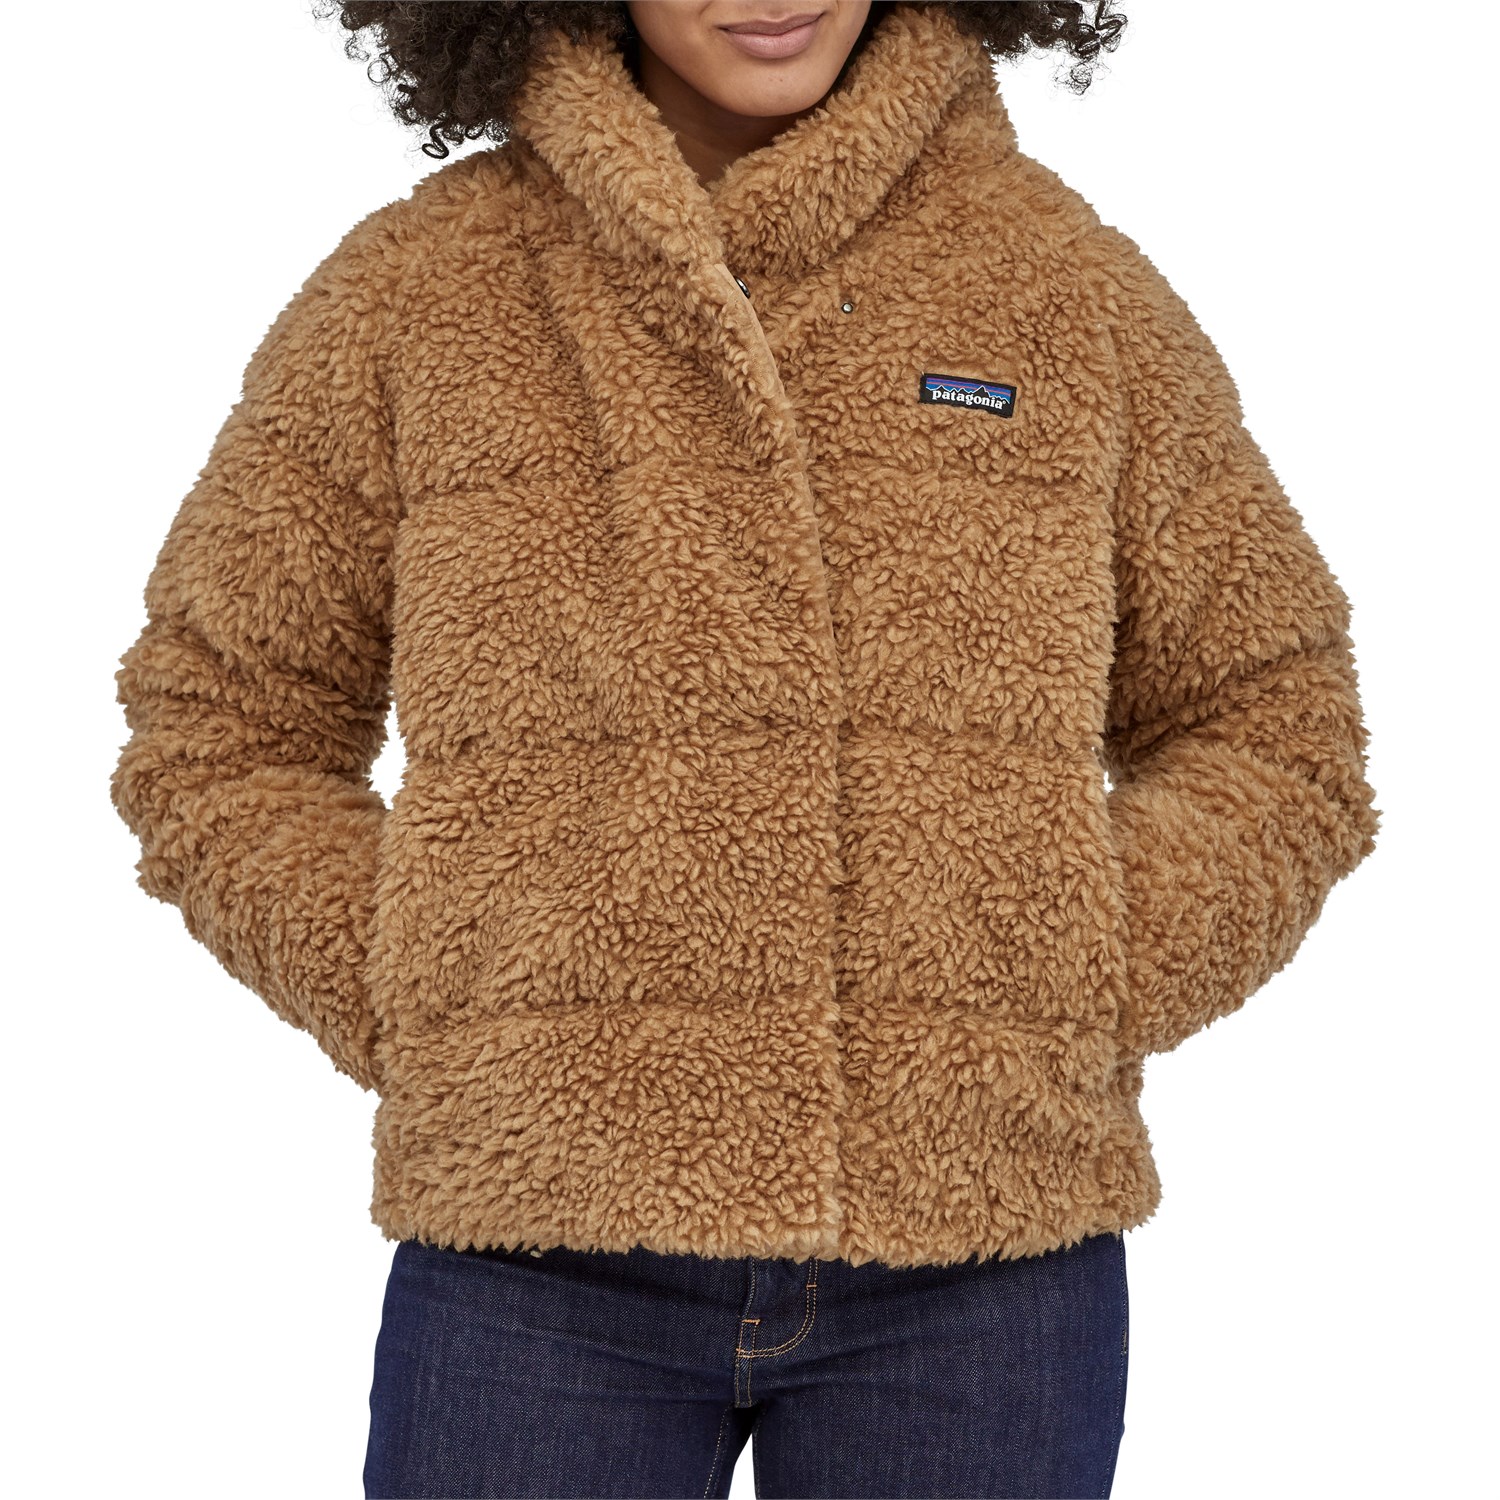 Patagonia Recycled High Pile Fleece Down Jacket - Women's - Clothing